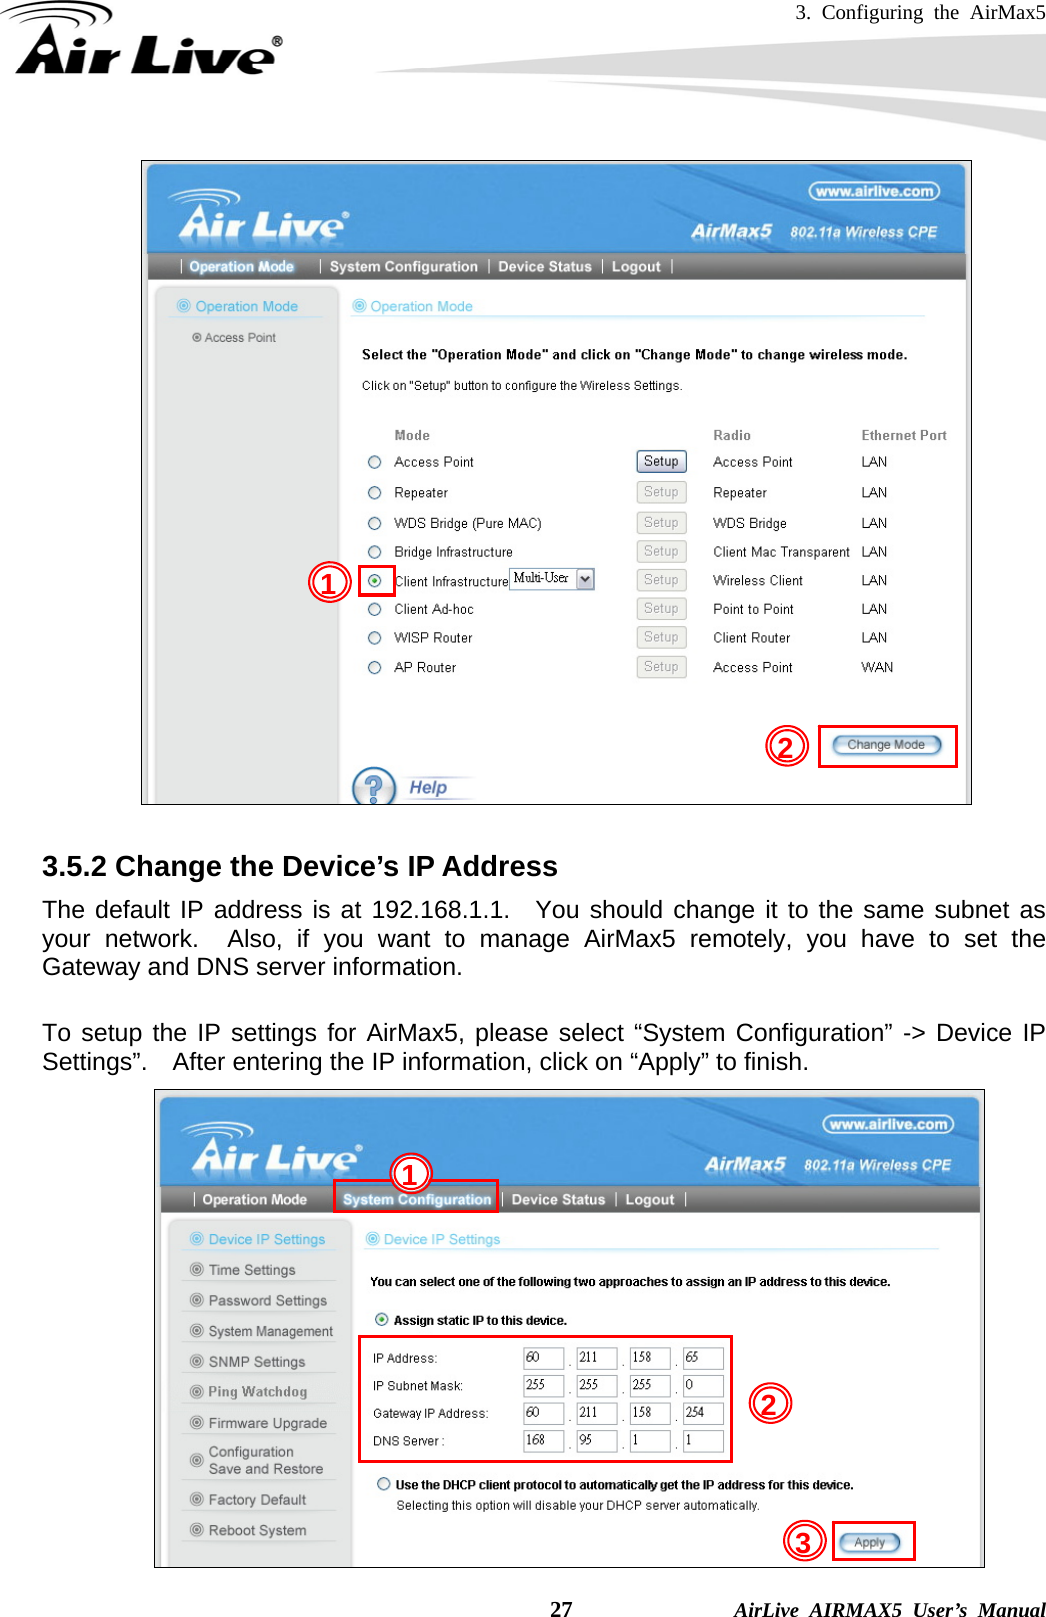 3. Configuring the AirMax5    27              AirLive AIRMAX5 User’s Manual   3.5.2 Change the Device’s IP Address   The default IP address is at 192.168.1.1.  You should change it to the same subnet as your network.  Also, if you want to manage AirMax5 remotely, you have to set the Gateway and DNS server information.  To setup the IP settings for AirMax5, please select “System Configuration” -&gt; Device IP Settings”.    After entering the IP information, click on “Apply” to finish.  21 1 23 